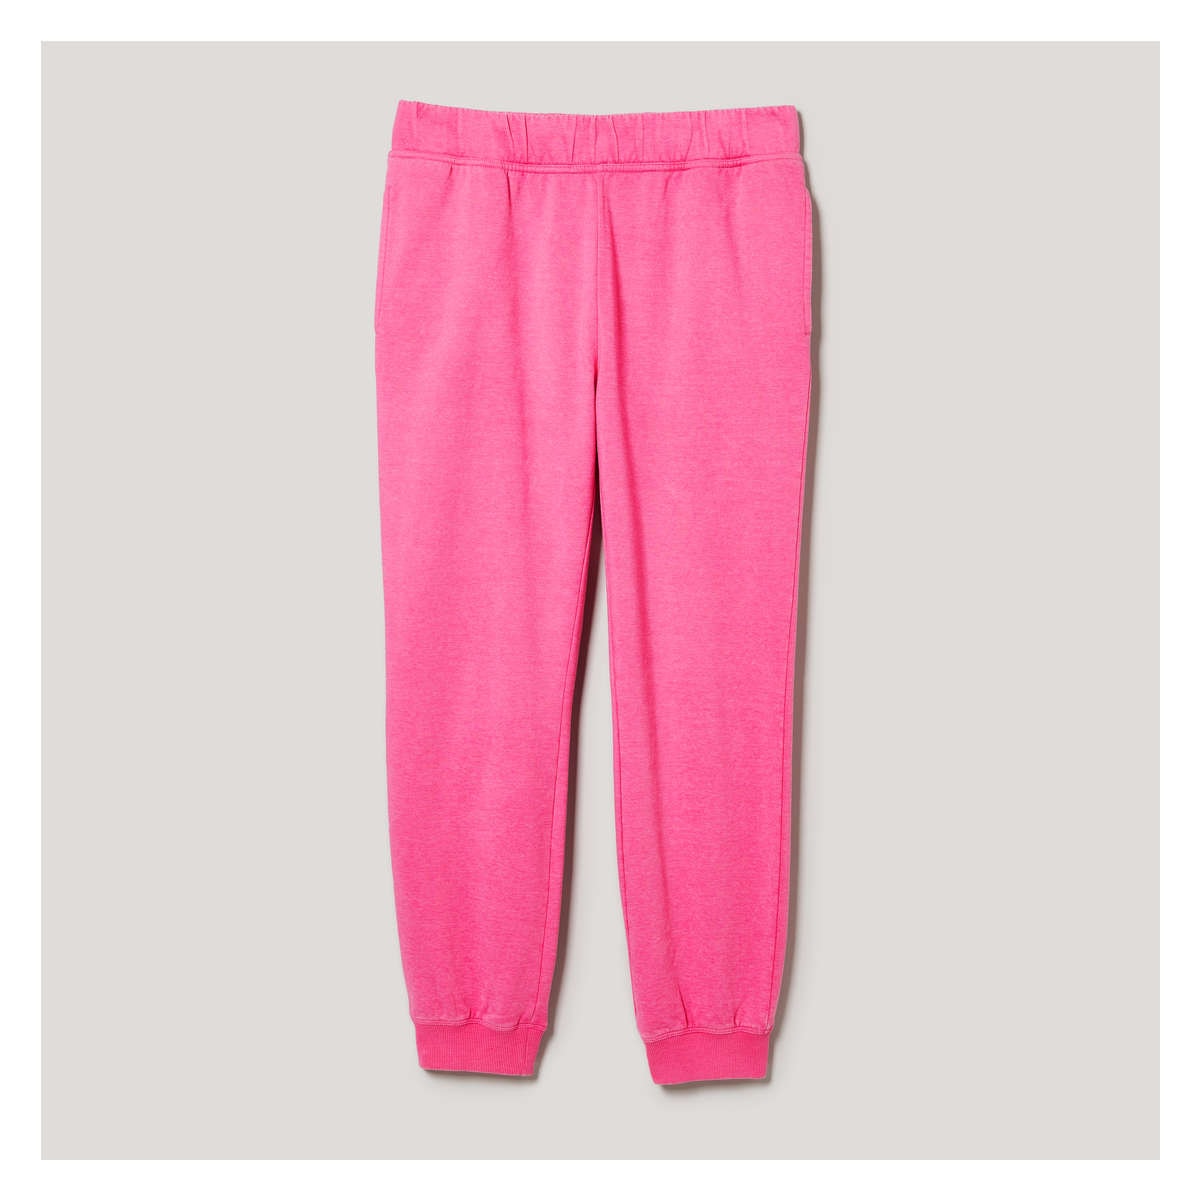 Active Jogger in Pink from Joe Fresh